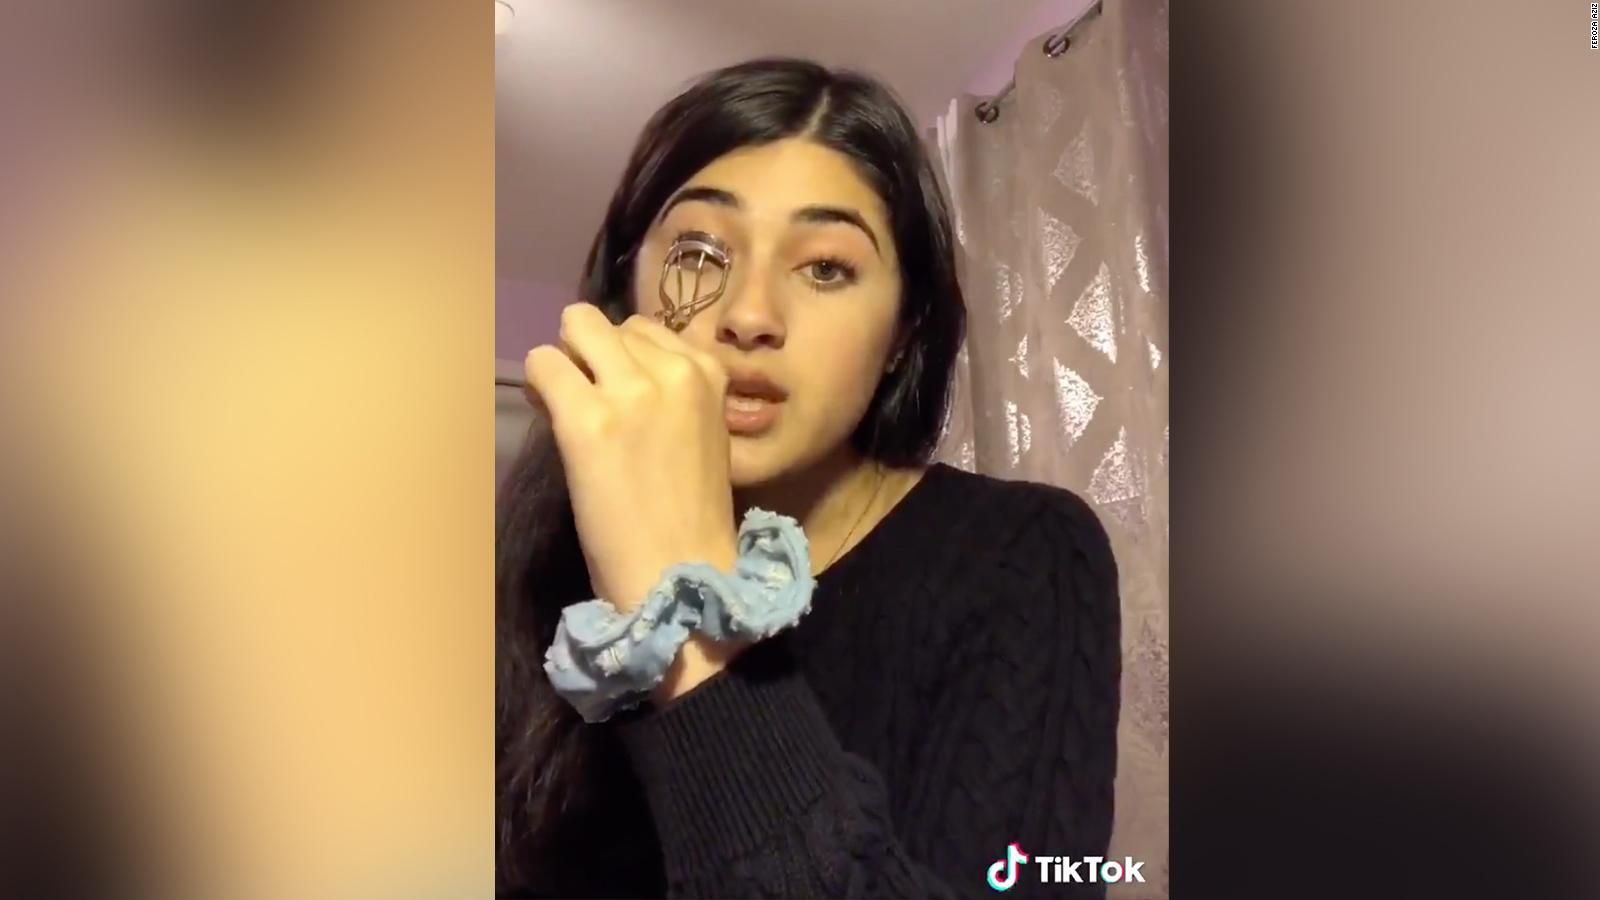 TikTok Beauty Video With A Hidden Anti China Message Goes Viral